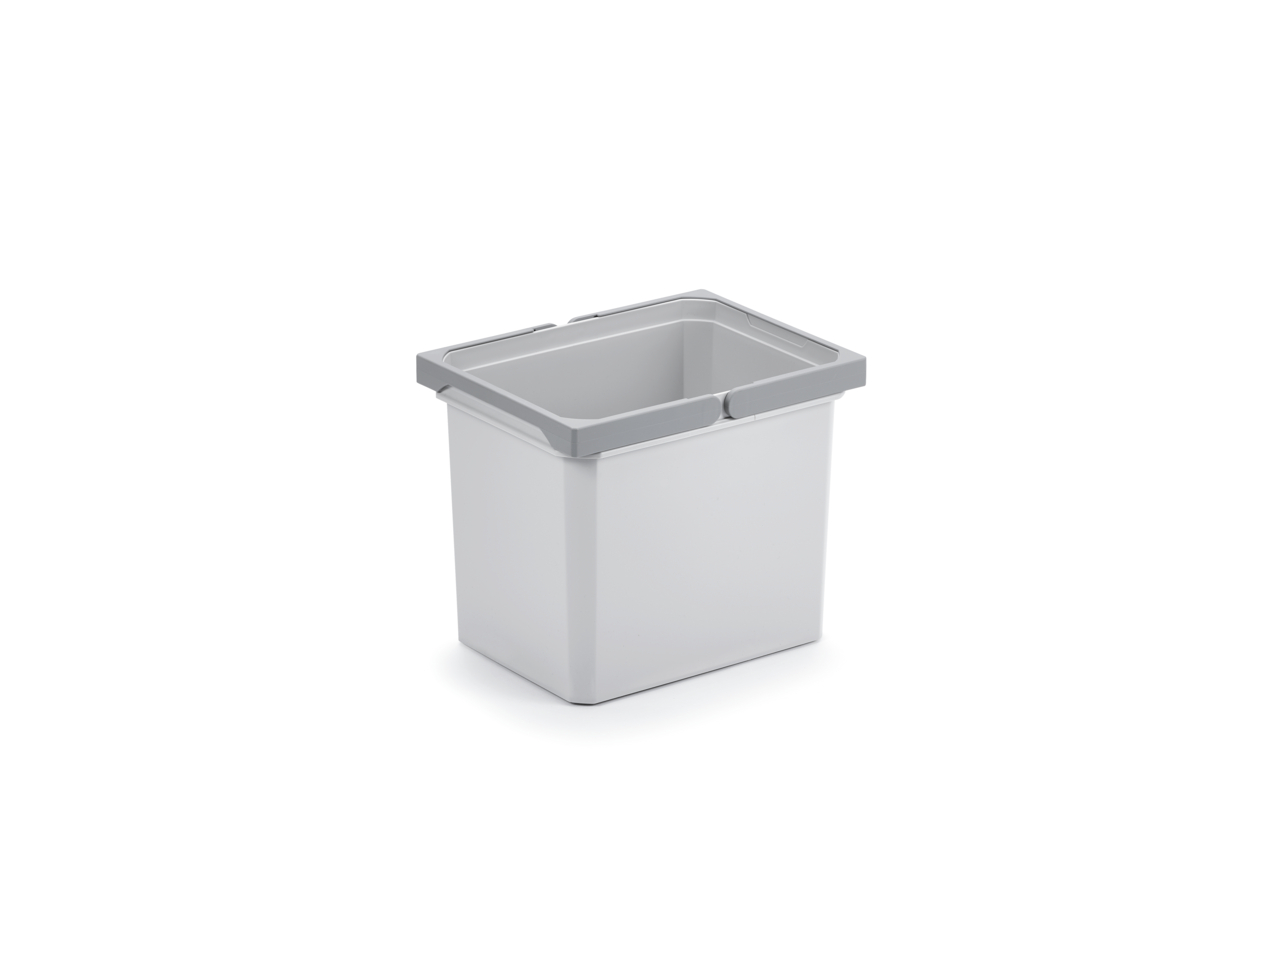  Cox® system container, light grey, 12 liters